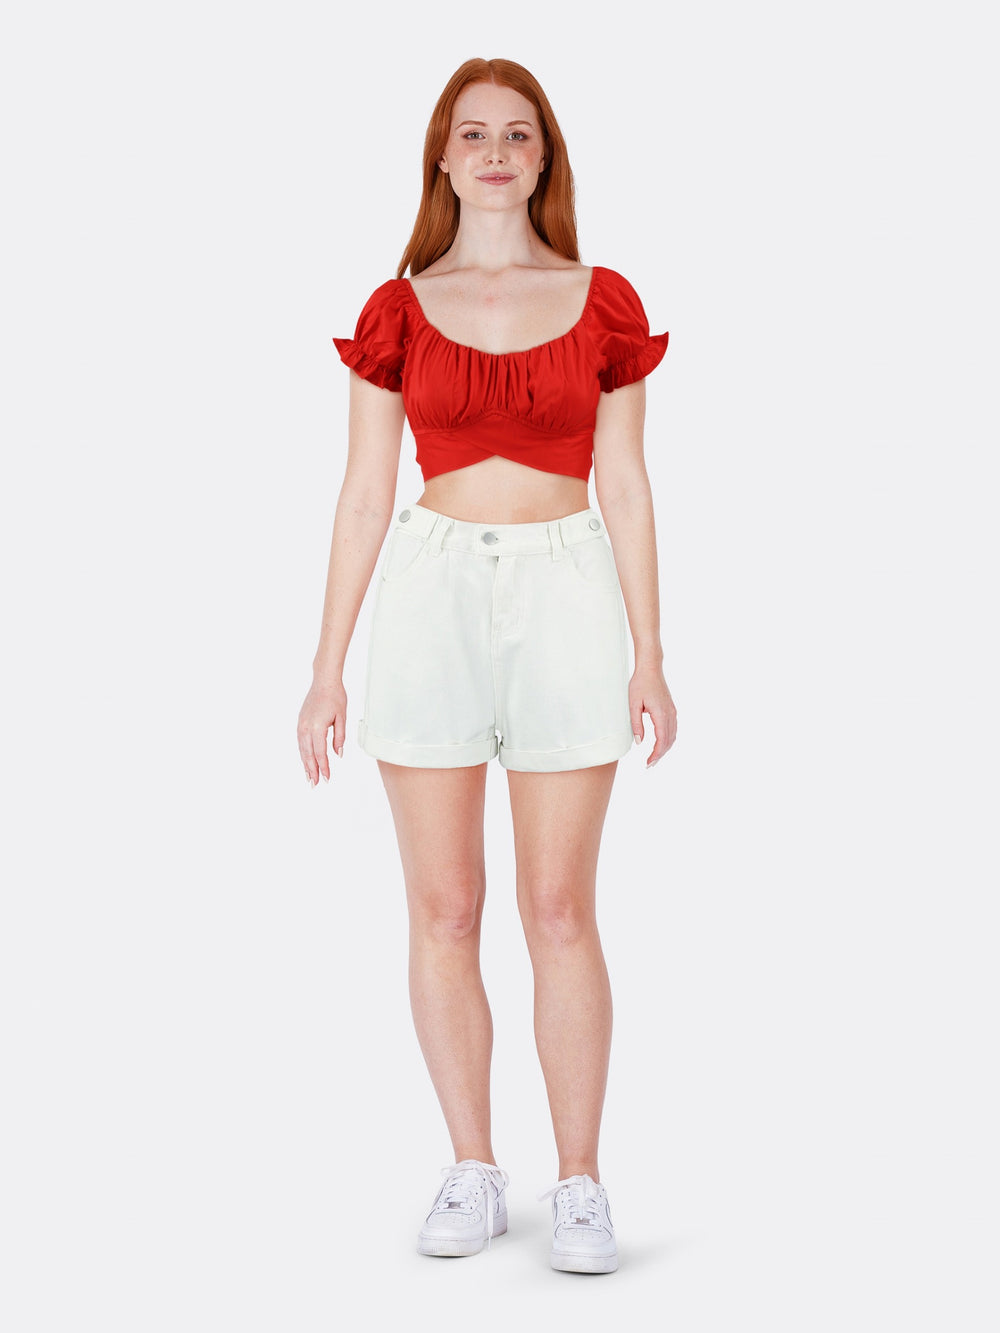 Short Sleeve Crop Top with Backless Tie Red Front